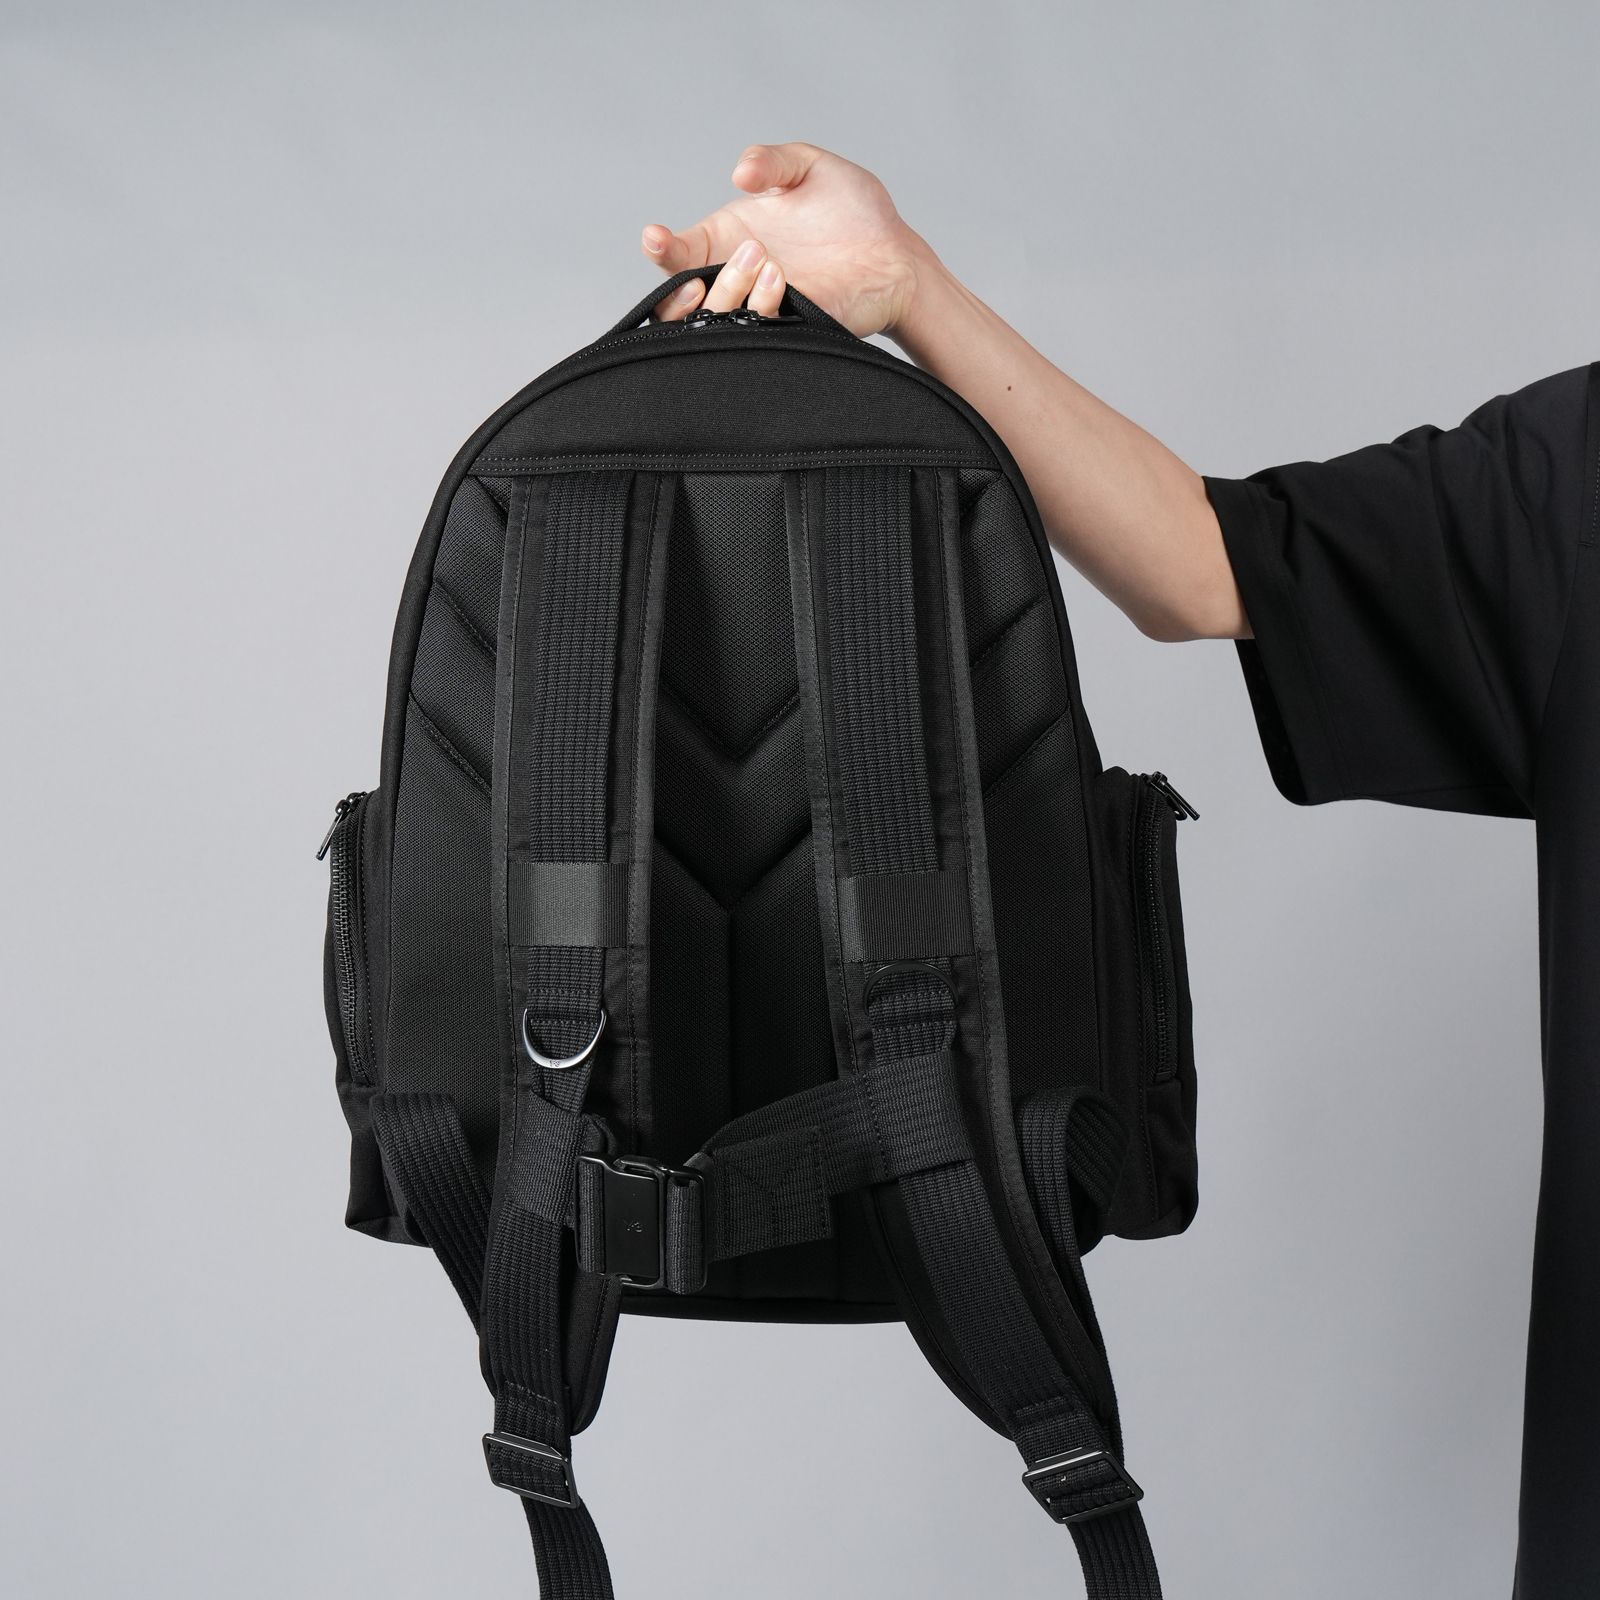 Y-3 - Y-3 BACKPACK / ワイスリー バックパック (ブラック) | Confidence